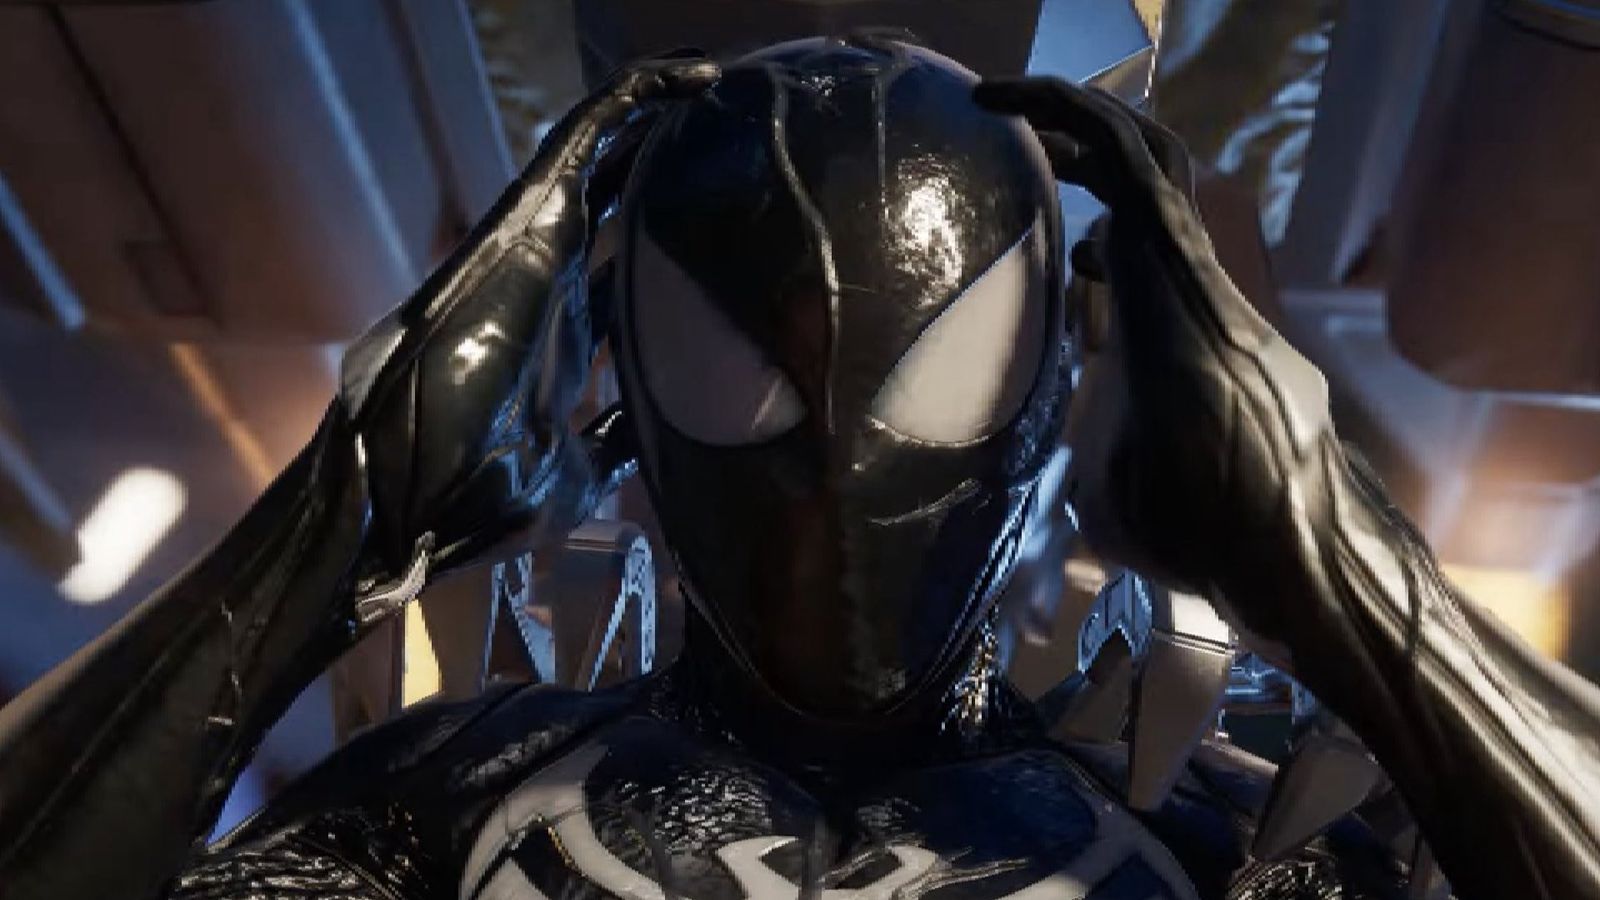 Spider-Man 2 fall damage - Symbiote Suit Peter Parker looking shocked 